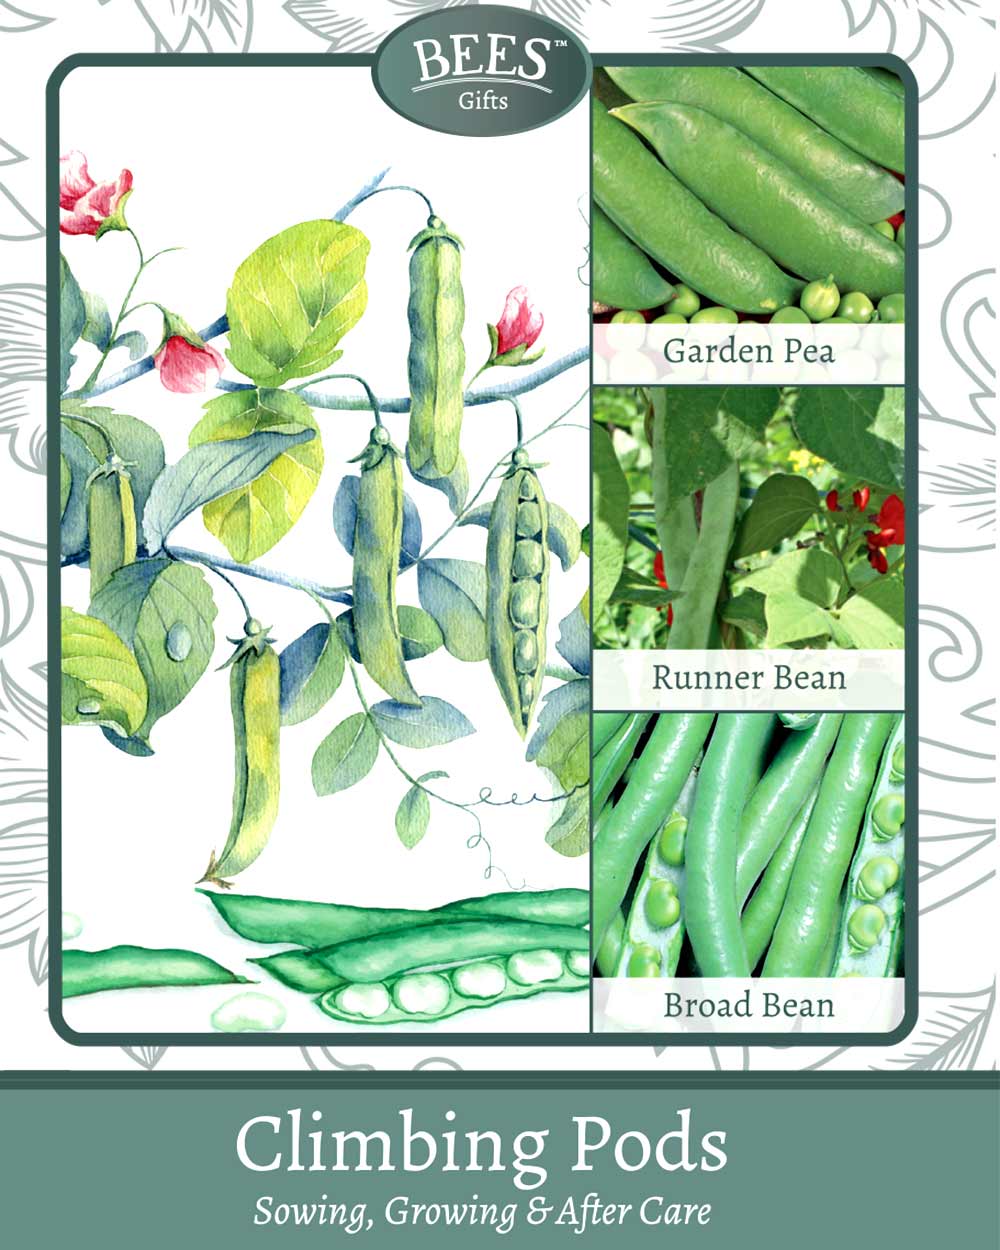 This Grow Your Own Climbing Pea & Bean Giftset has everything you need to start growing your own veg. Not only will you save money but you'll gain satisfaction in growing your own vegetables at home.   Climbing plants are an attractive feature for any allotment or vegetable garden. Peas and beans are one of the most productive plants you can grow, and give a bumper crop.